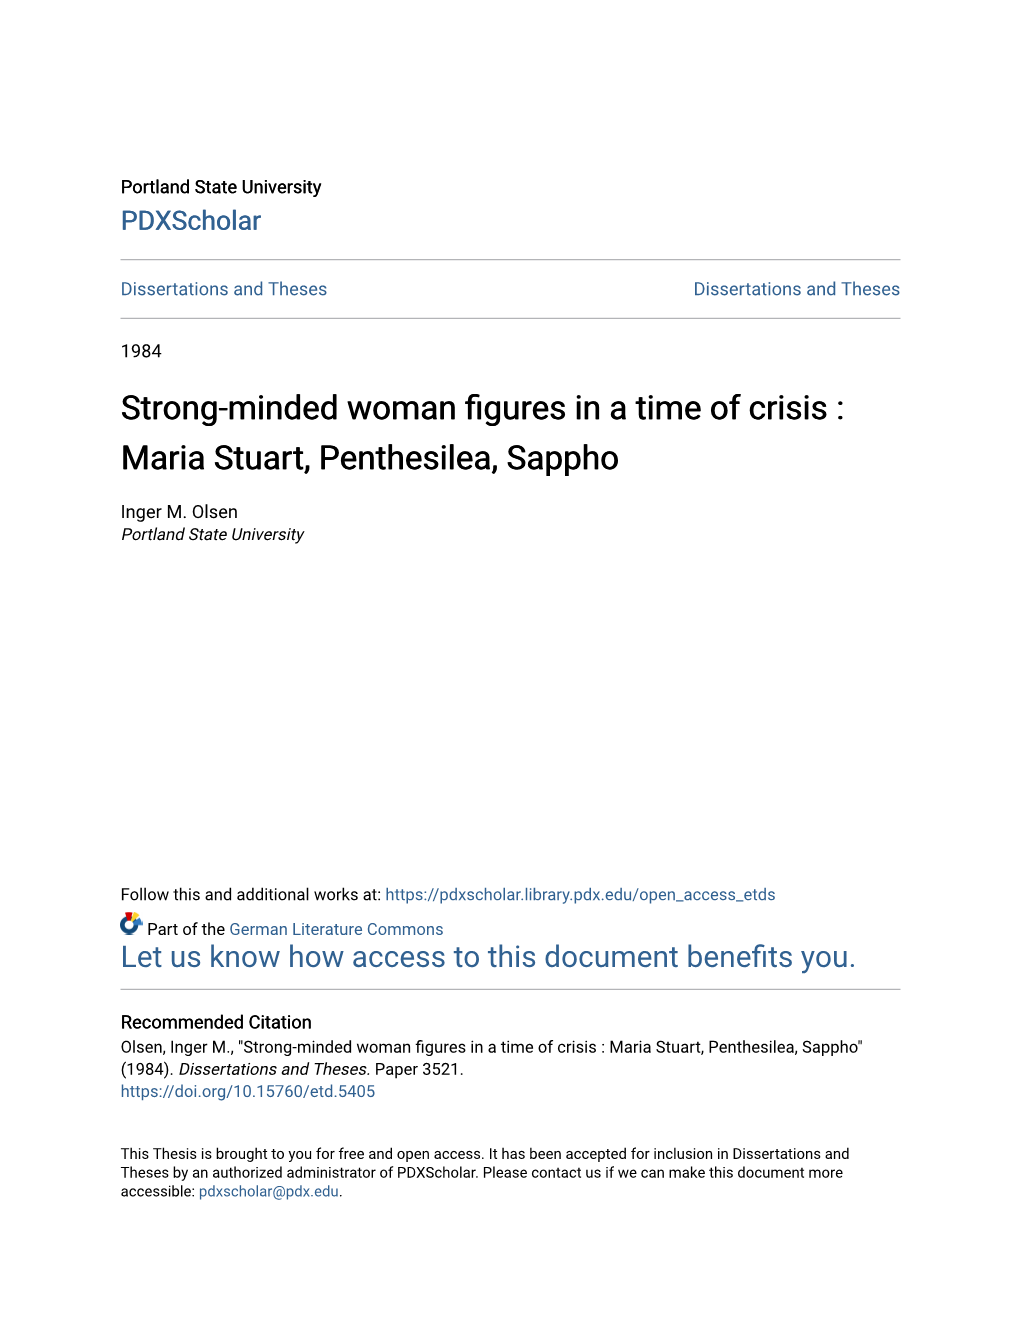 Strong-Minded Woman Figures in a Time of Crisis : Maria Stuart, Penthesilea, Sappho